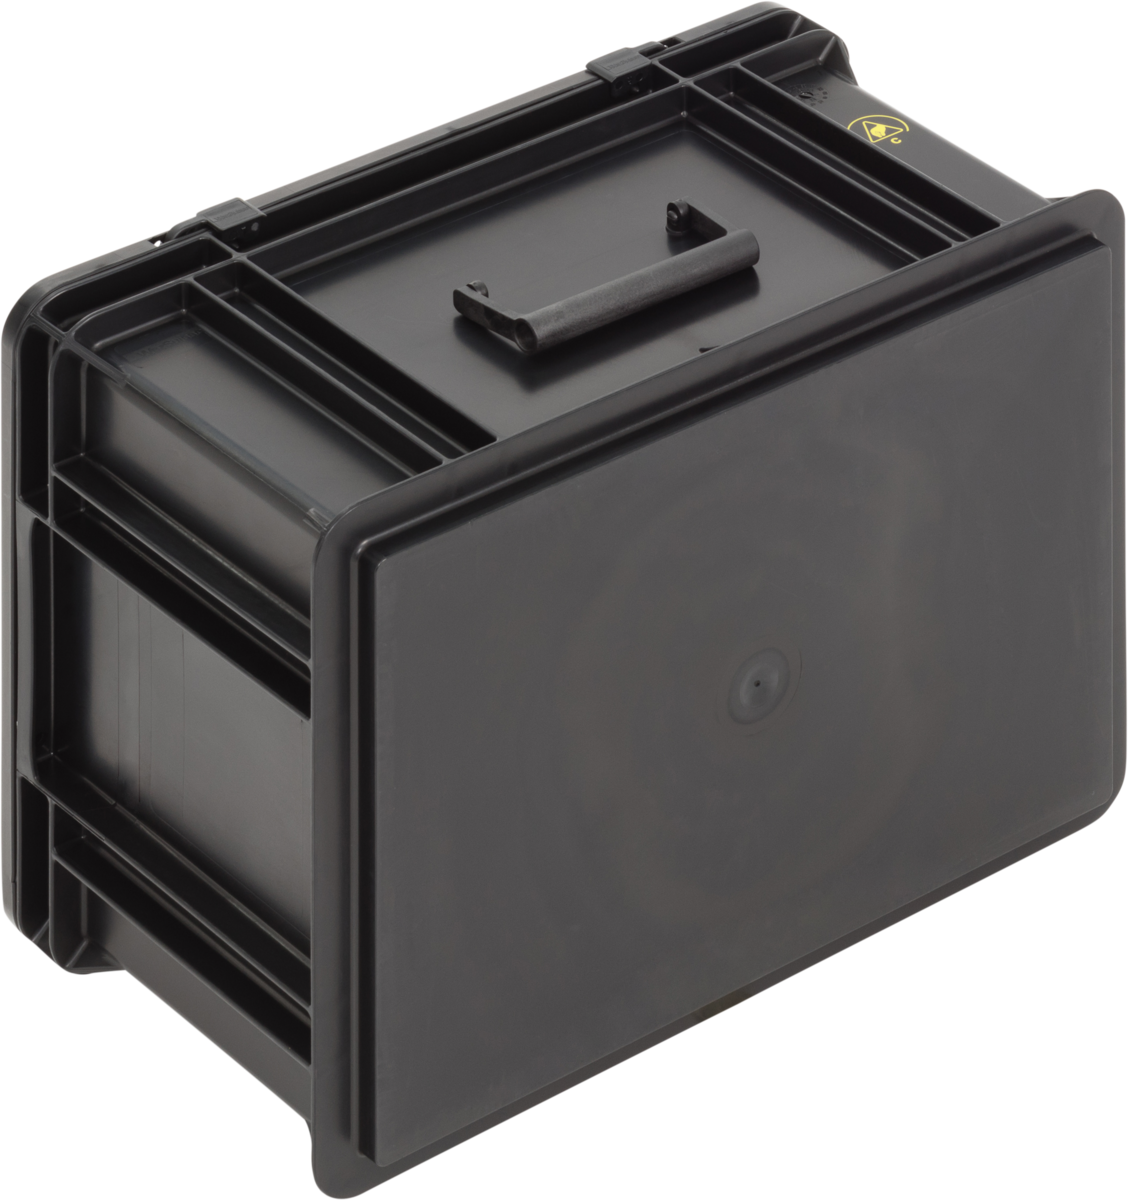 ESD-Safe-SGL-Norm-Carrying-Cases-Flat-Base-007-Ref.-4320.397.992_1004398_400x300x221_02_variant